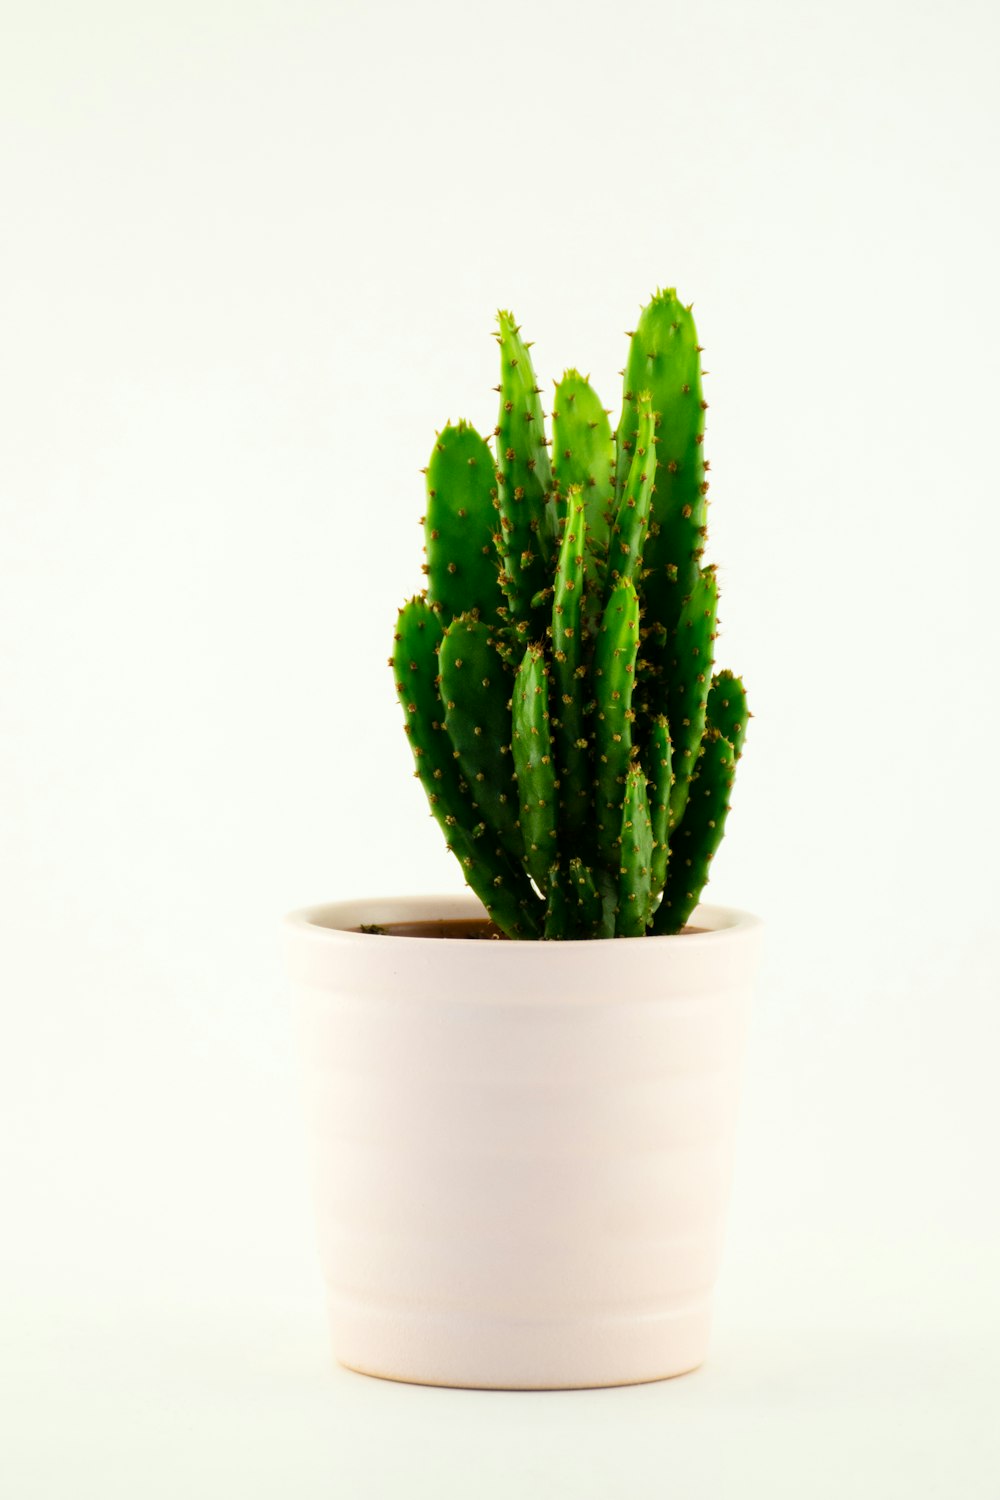 20+ Cactus Plant Pictures [HD]   Download Free Images on Unsplash